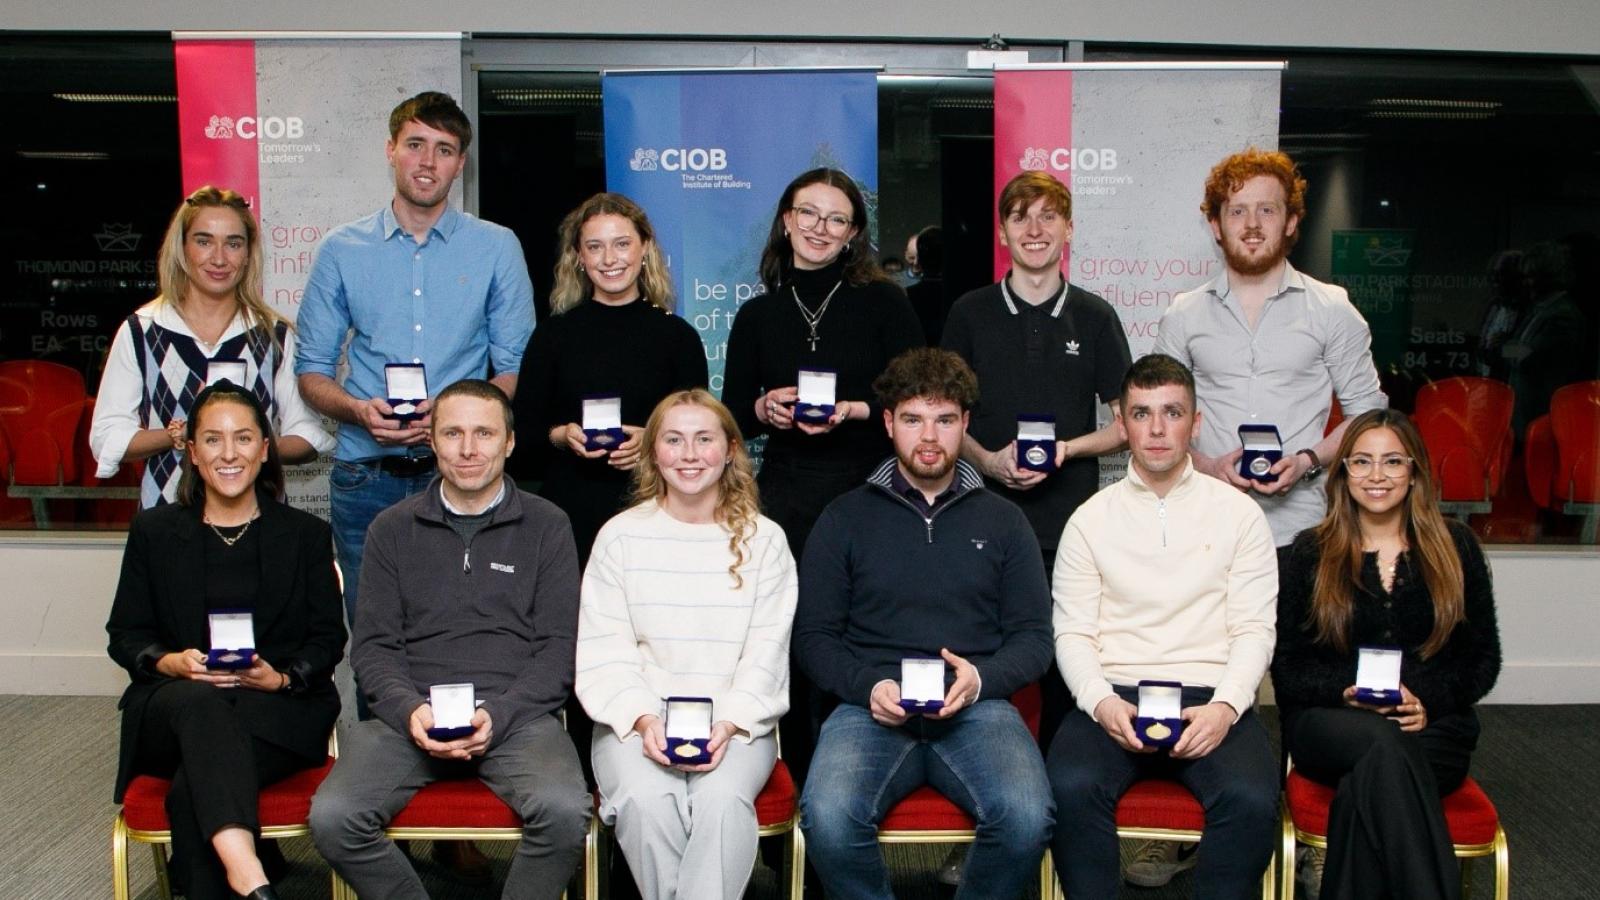 ATU teams from Galway, Donegal and Sligo campuses, placed 1st 2nd and 3r